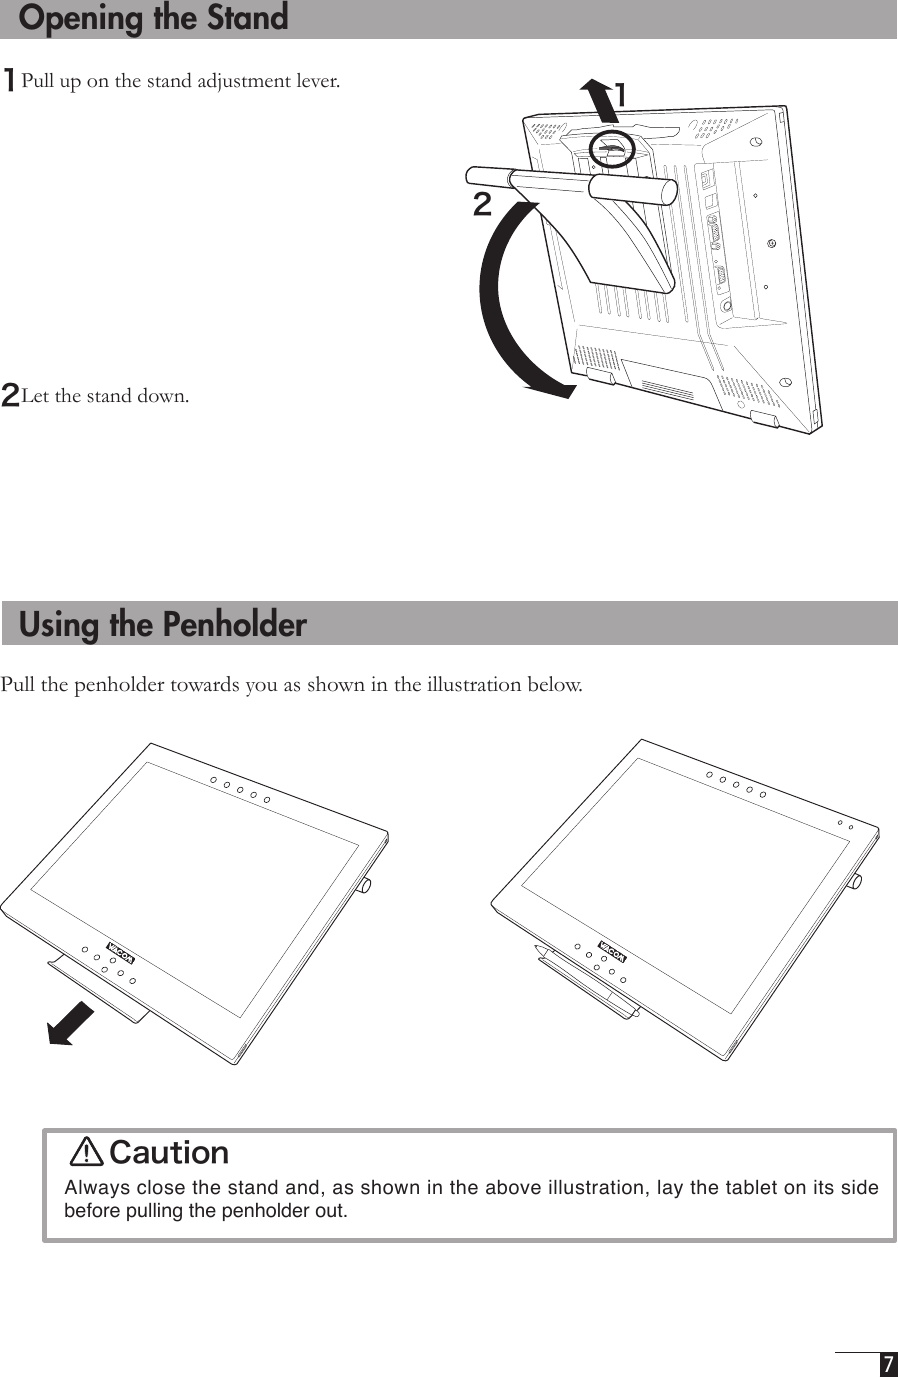  7   Opening the Stand1Pull up on the stand adjustment lever. 2Let the stand down.  Using the PenholderPull the penholder towards you as shown in the illustration below.  12Caution  Always close the stand and, as shown in the above illustration, lay the tablet on its side before pulling the penholder out.